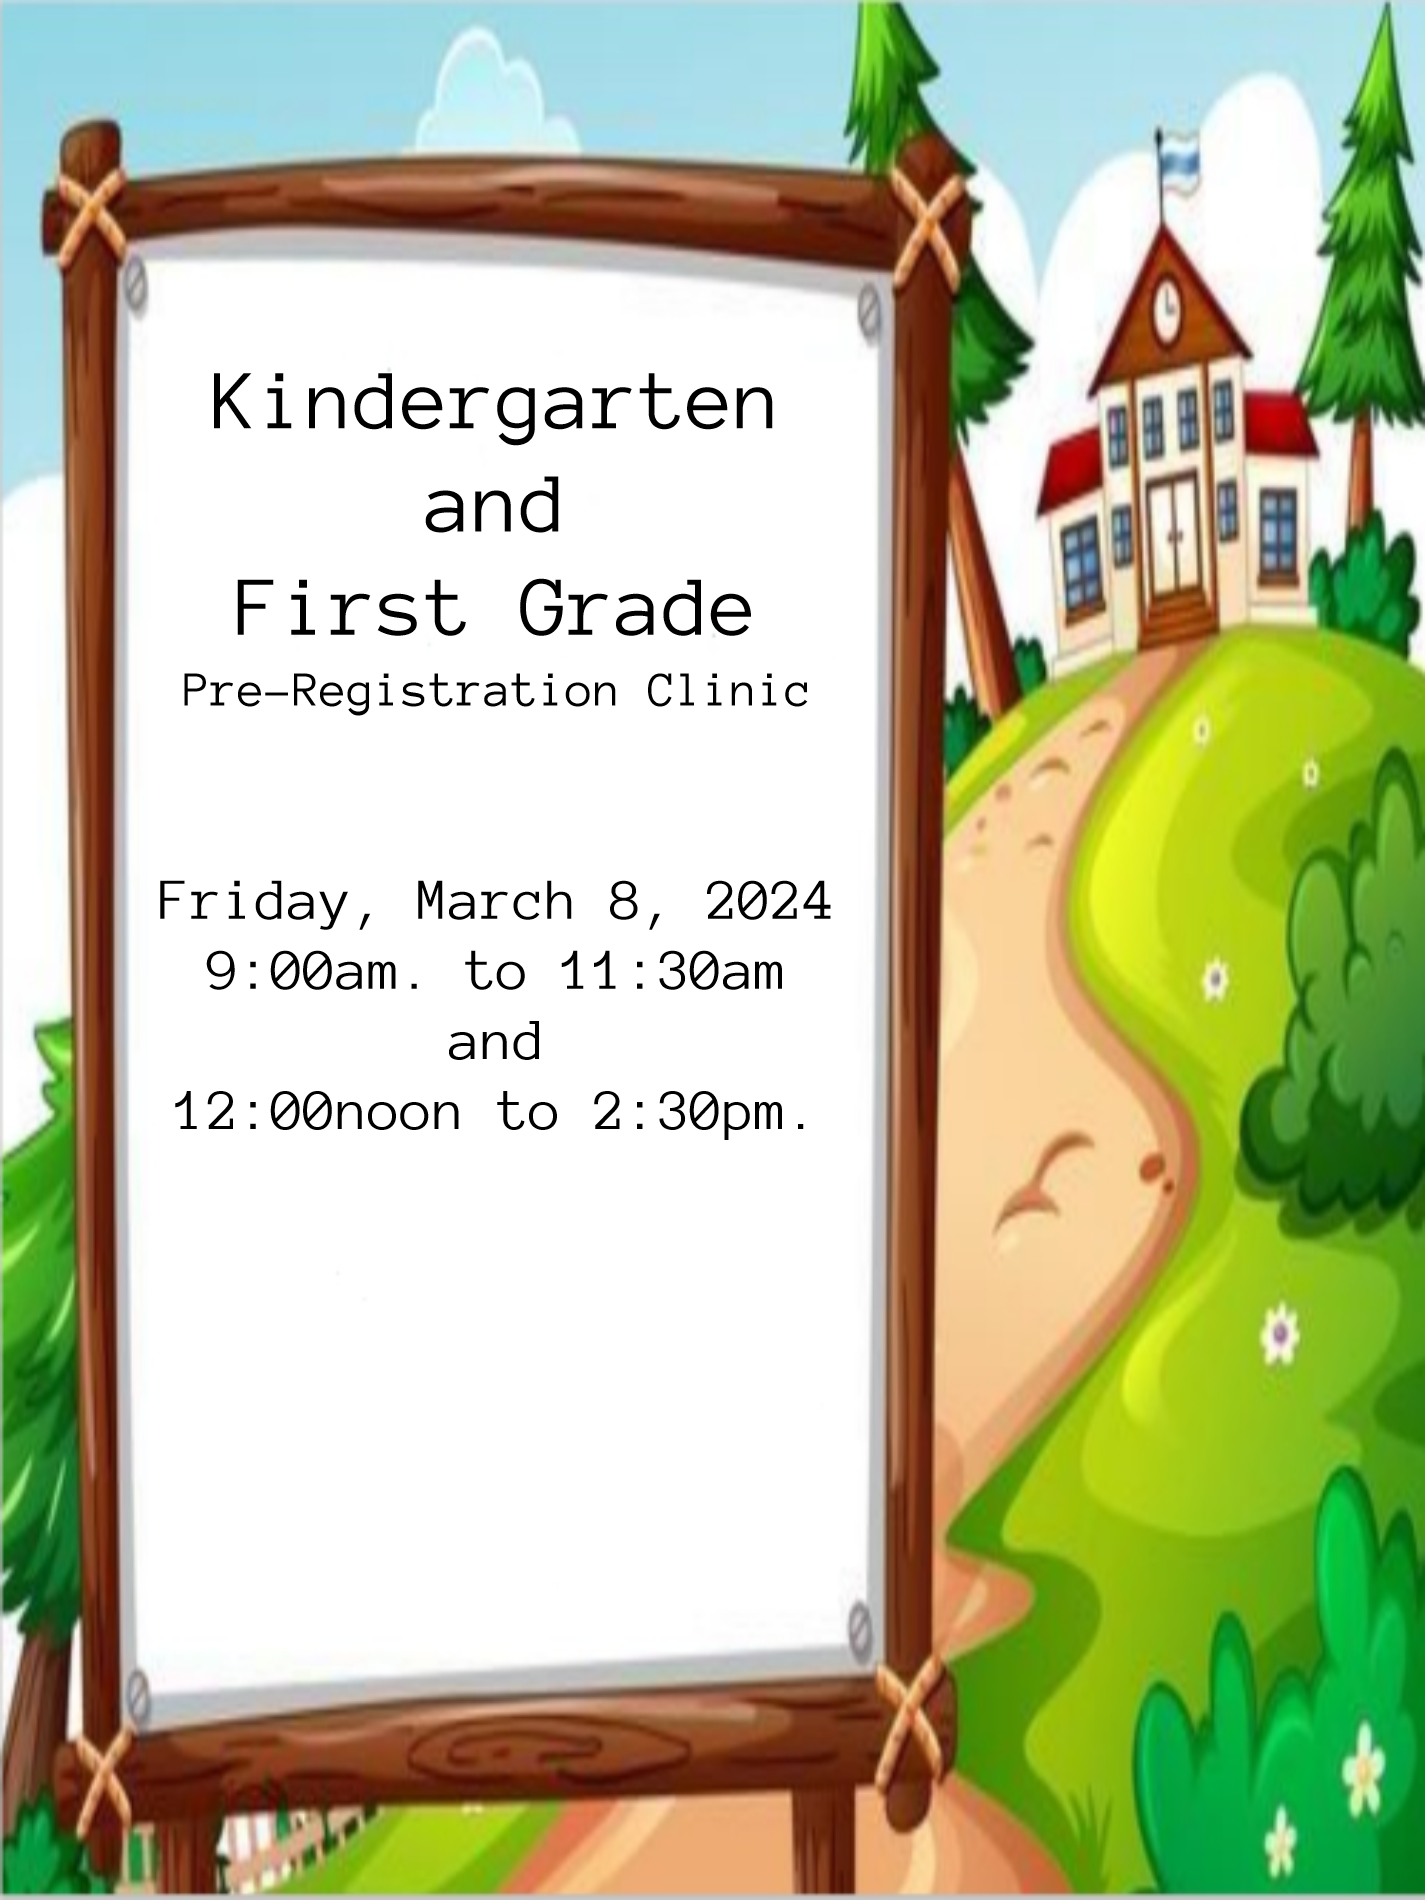 Kindergarten and First Grade Pre- Registration Clinic on Friday, March 8, 2024, from 9:00 a.m. until 11:30 a.m. and from 12:00 noon until 2:30 p.m.